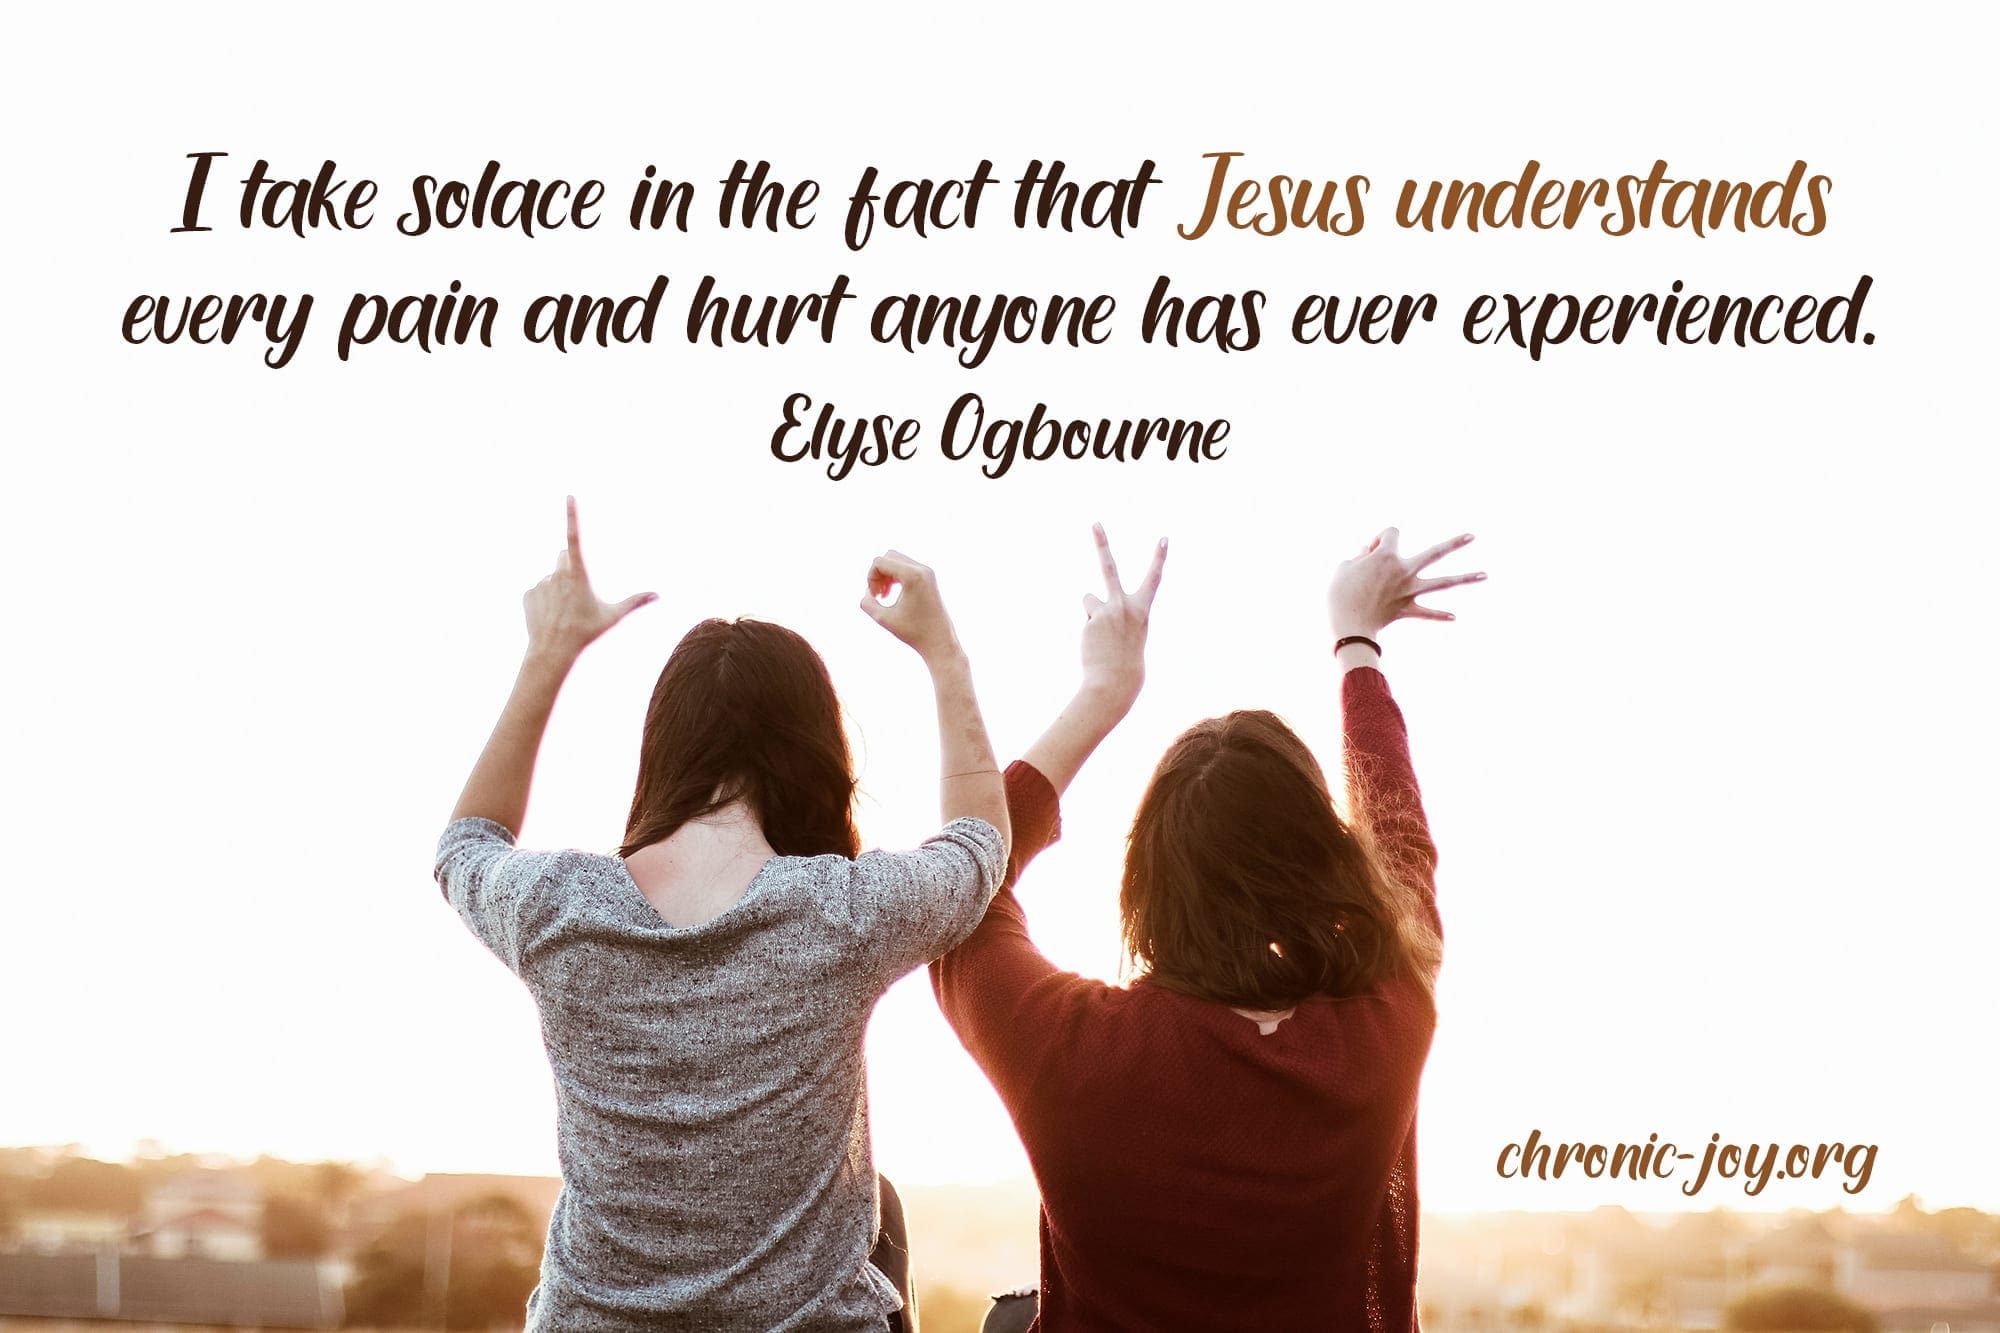 "I take solace in the fact that Jesus understands every pain and hurt anyone has ever experienced." Elyse Ogbourne